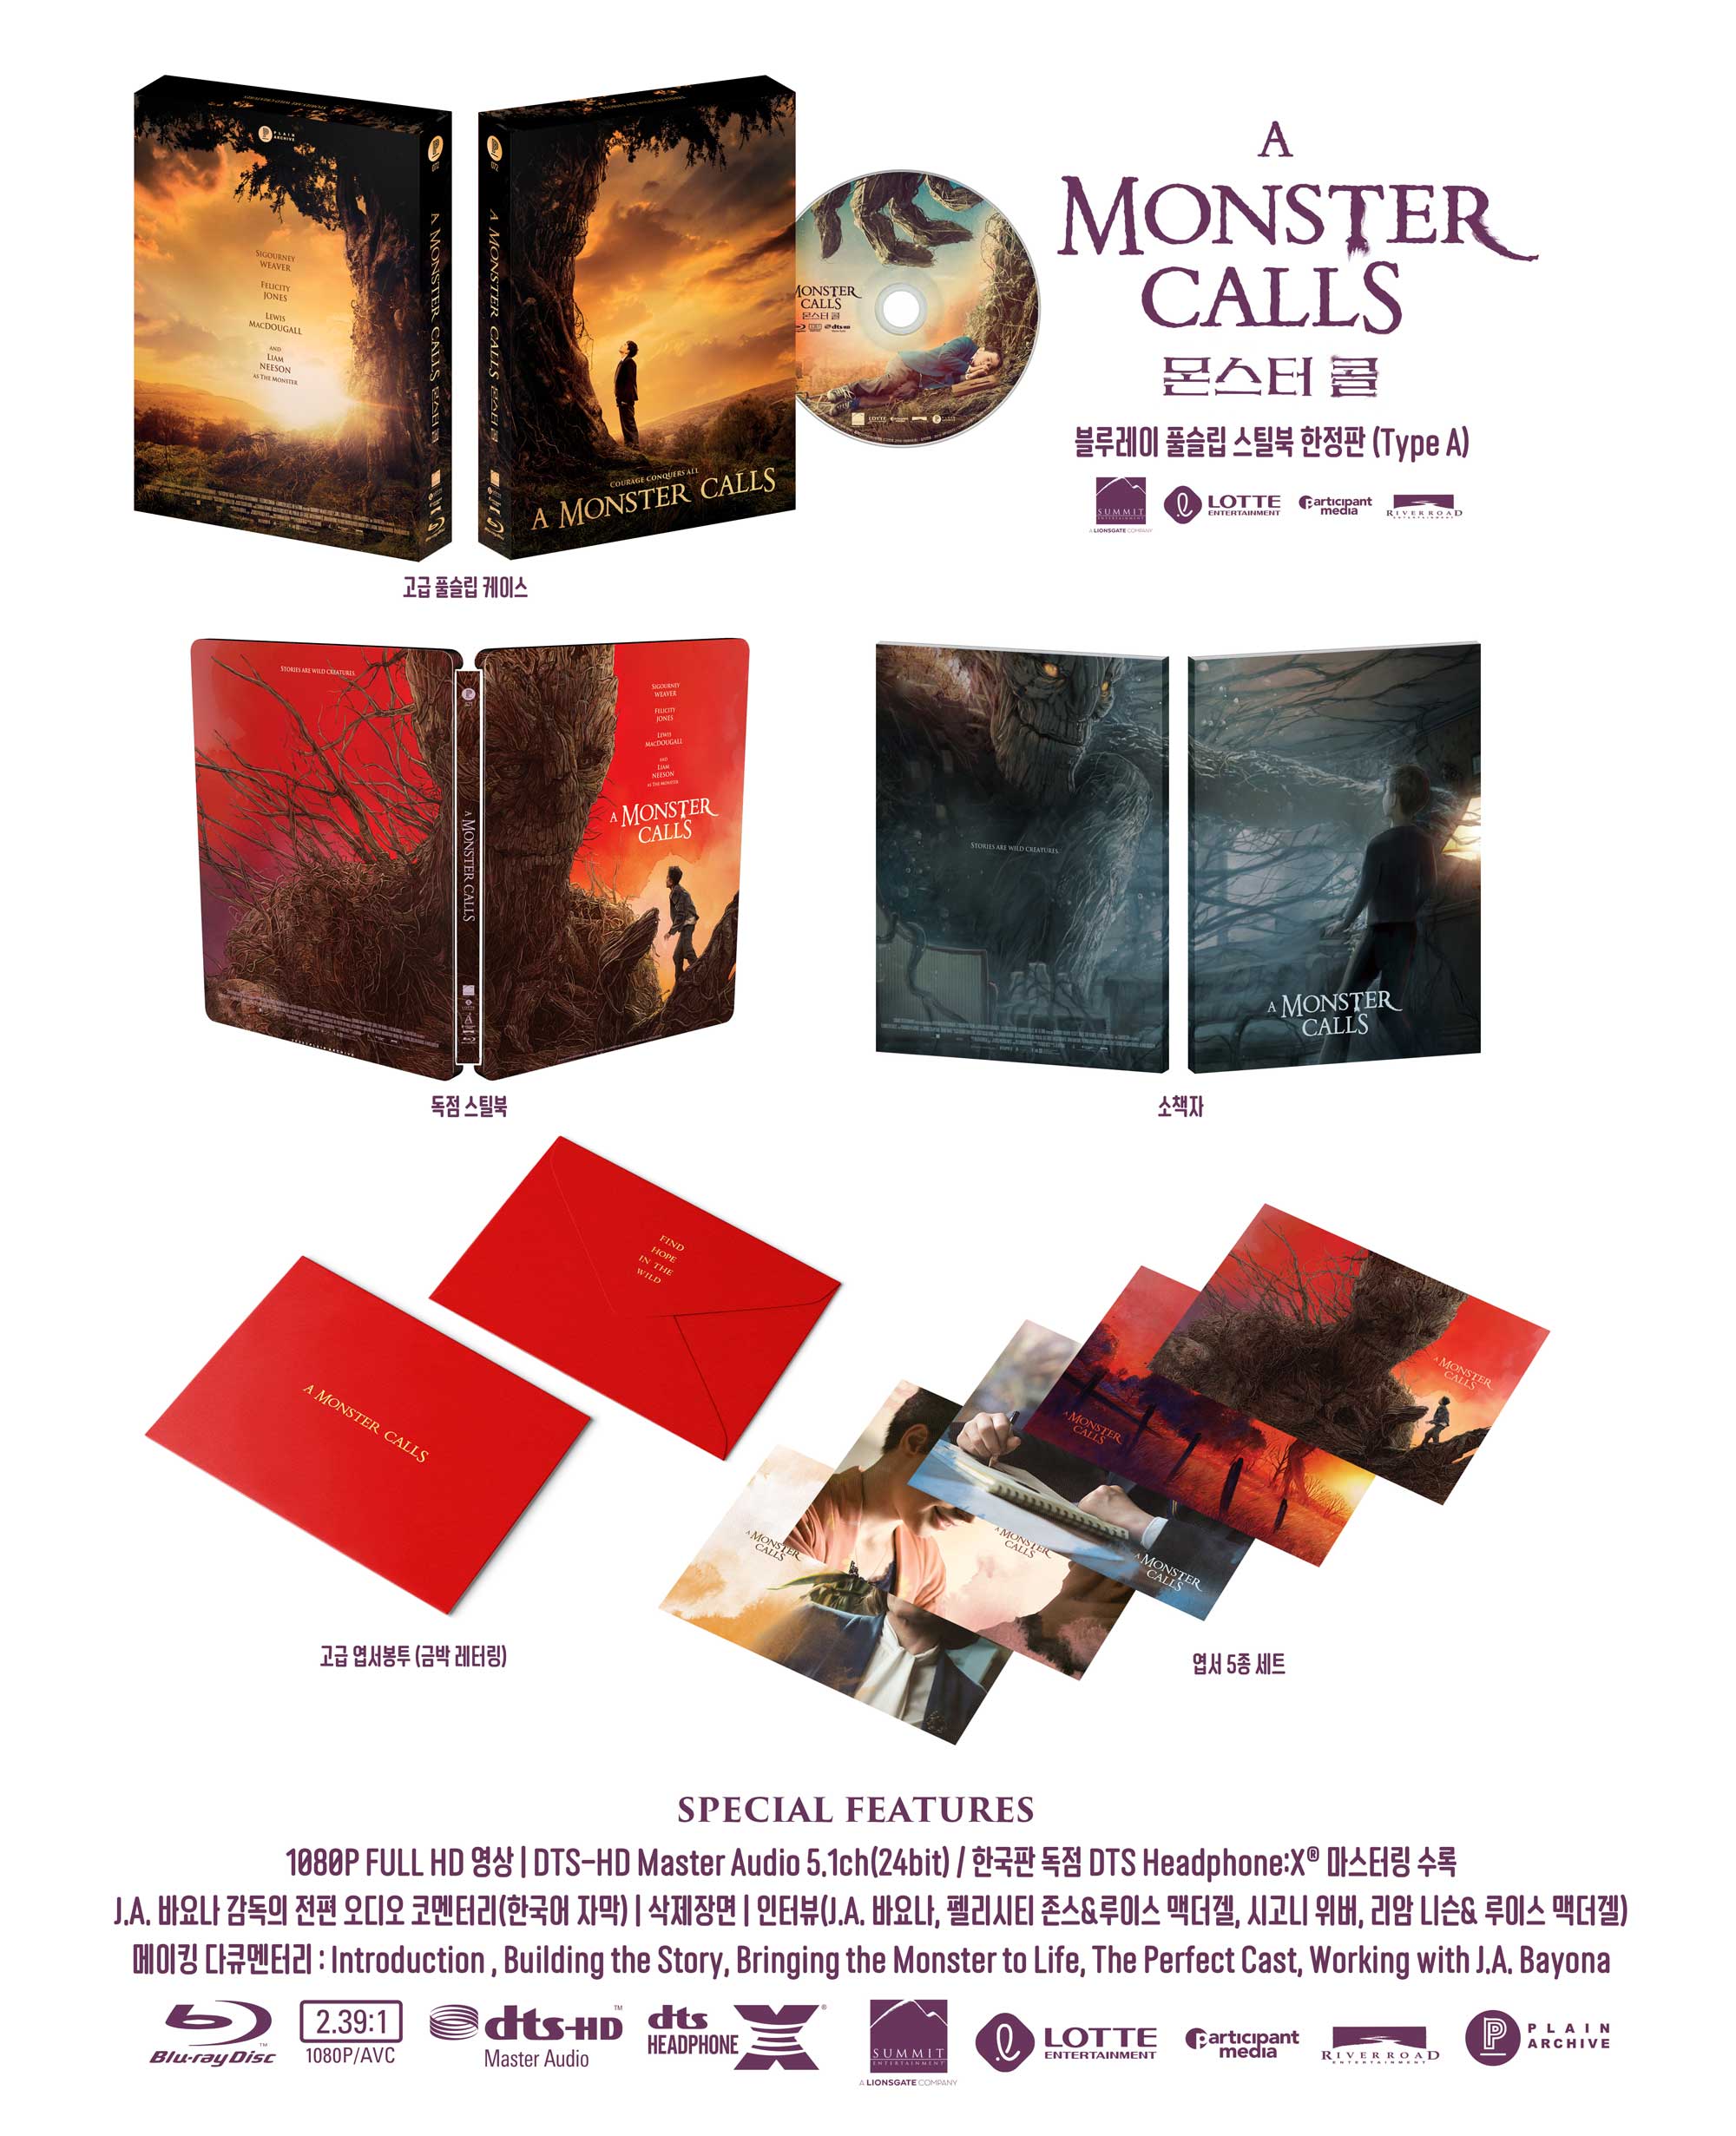 A Monster Calls: Steelbook with Full Slip (Type A)